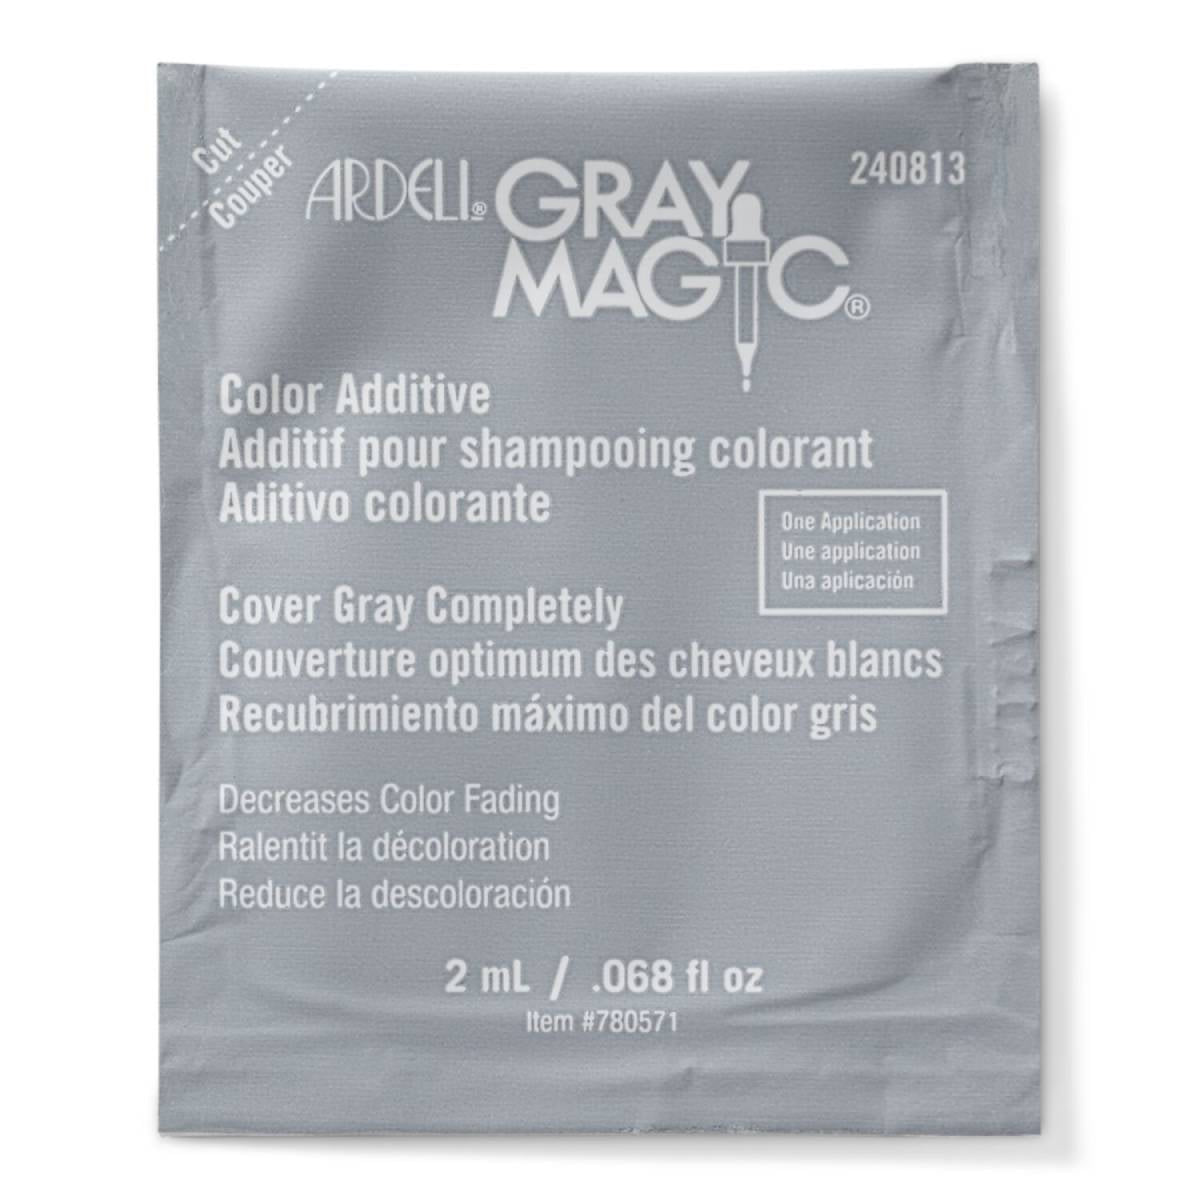 GREY MAGIC USO INDIVIDUAL COLOR SOLUTIONS - ARDELL